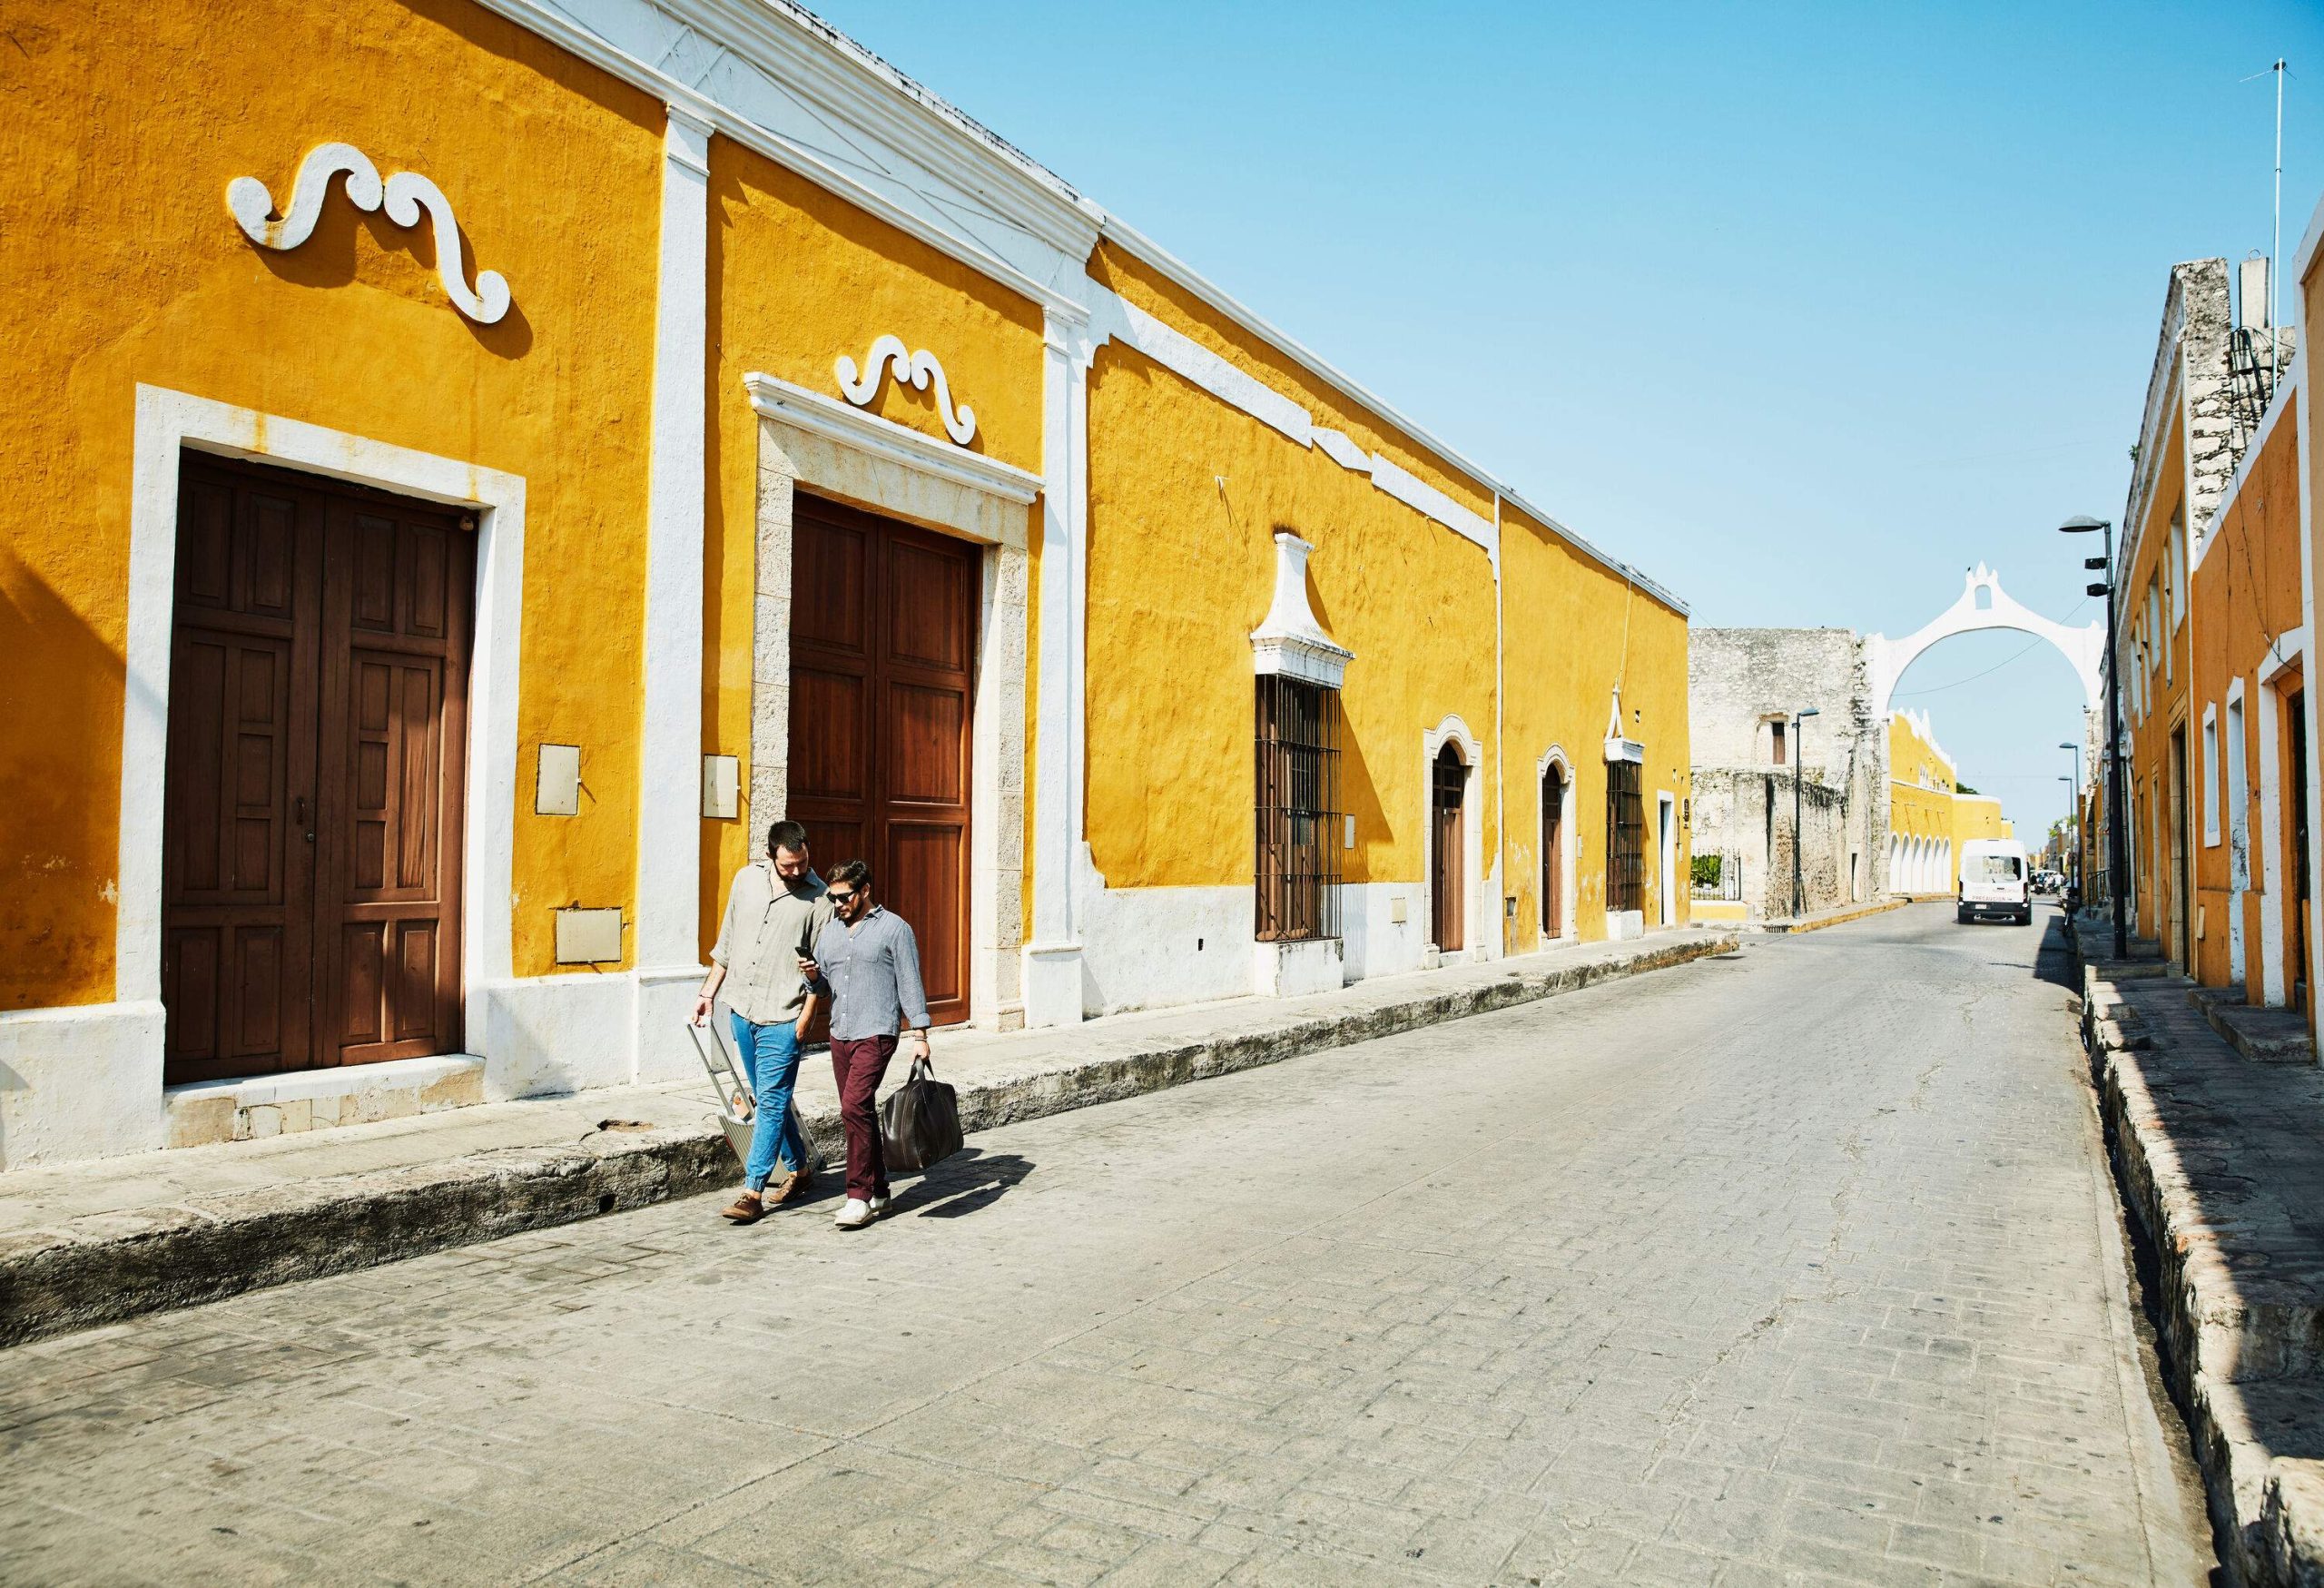 Two men carrying luggage are walking down a cobblestone street lined with yellow-painted houses.